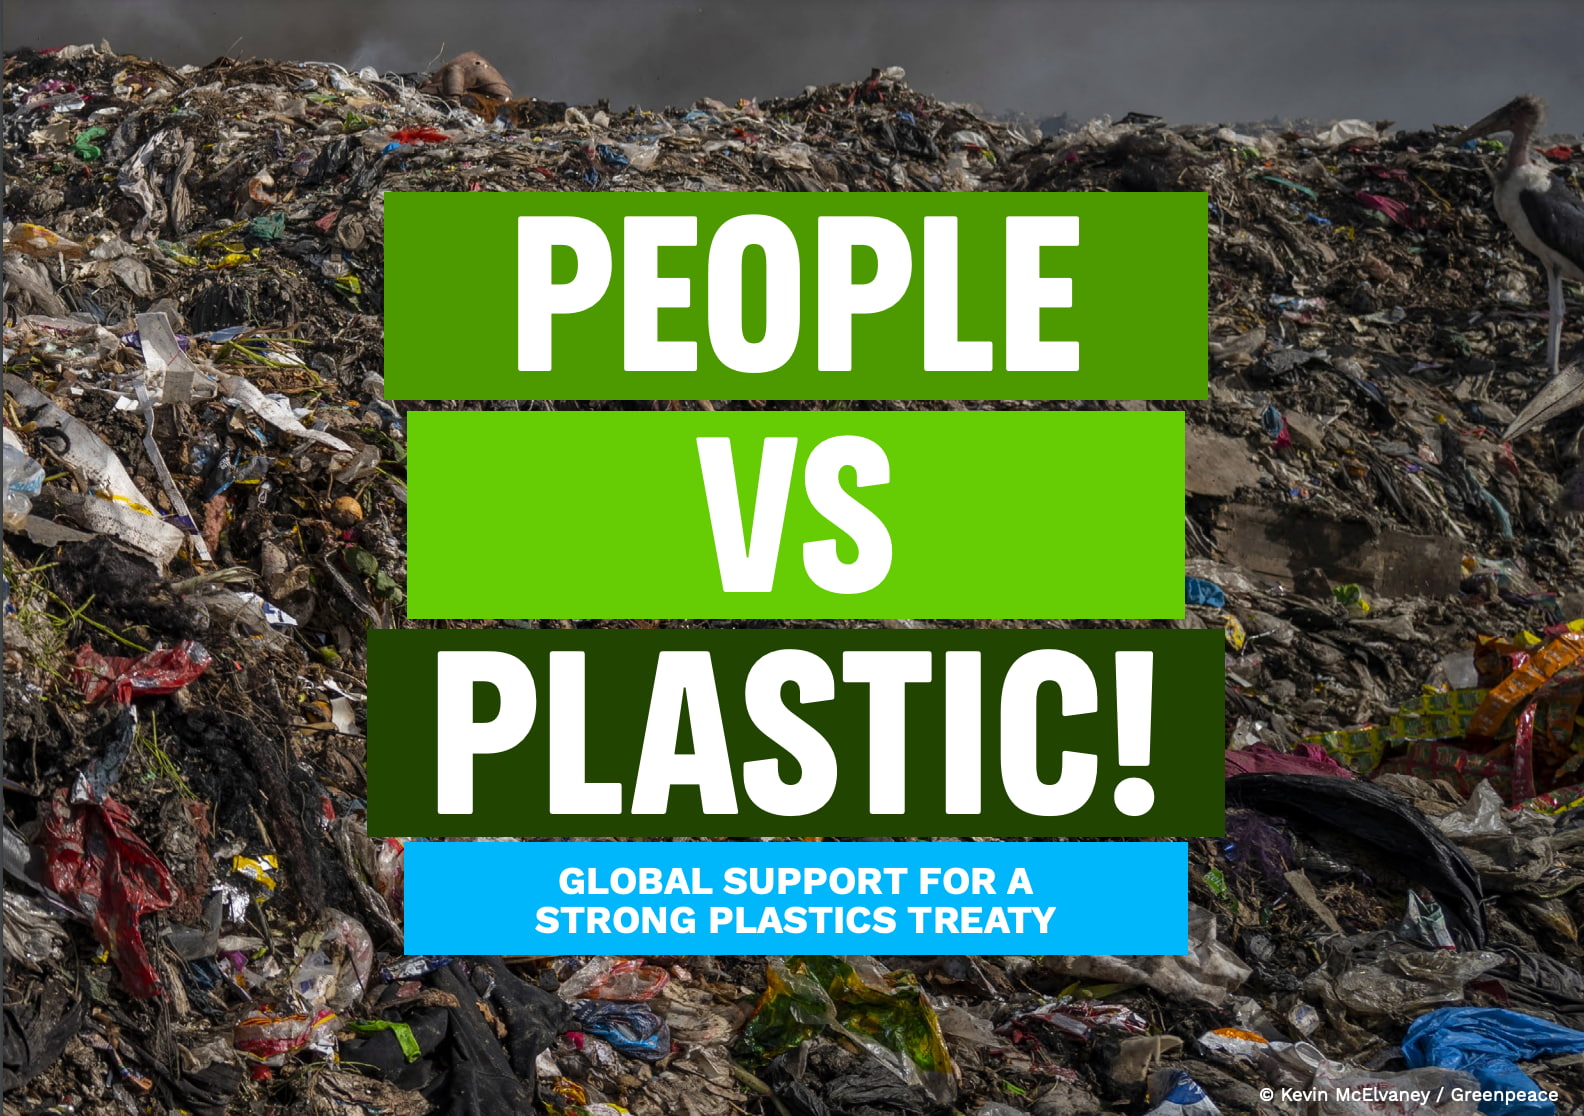 The results of this survey demonstrate that there is overwhelming public support for the Global Plastics Treaty to cut plastic production, end single-use plastics and advance reuse-based solutions.